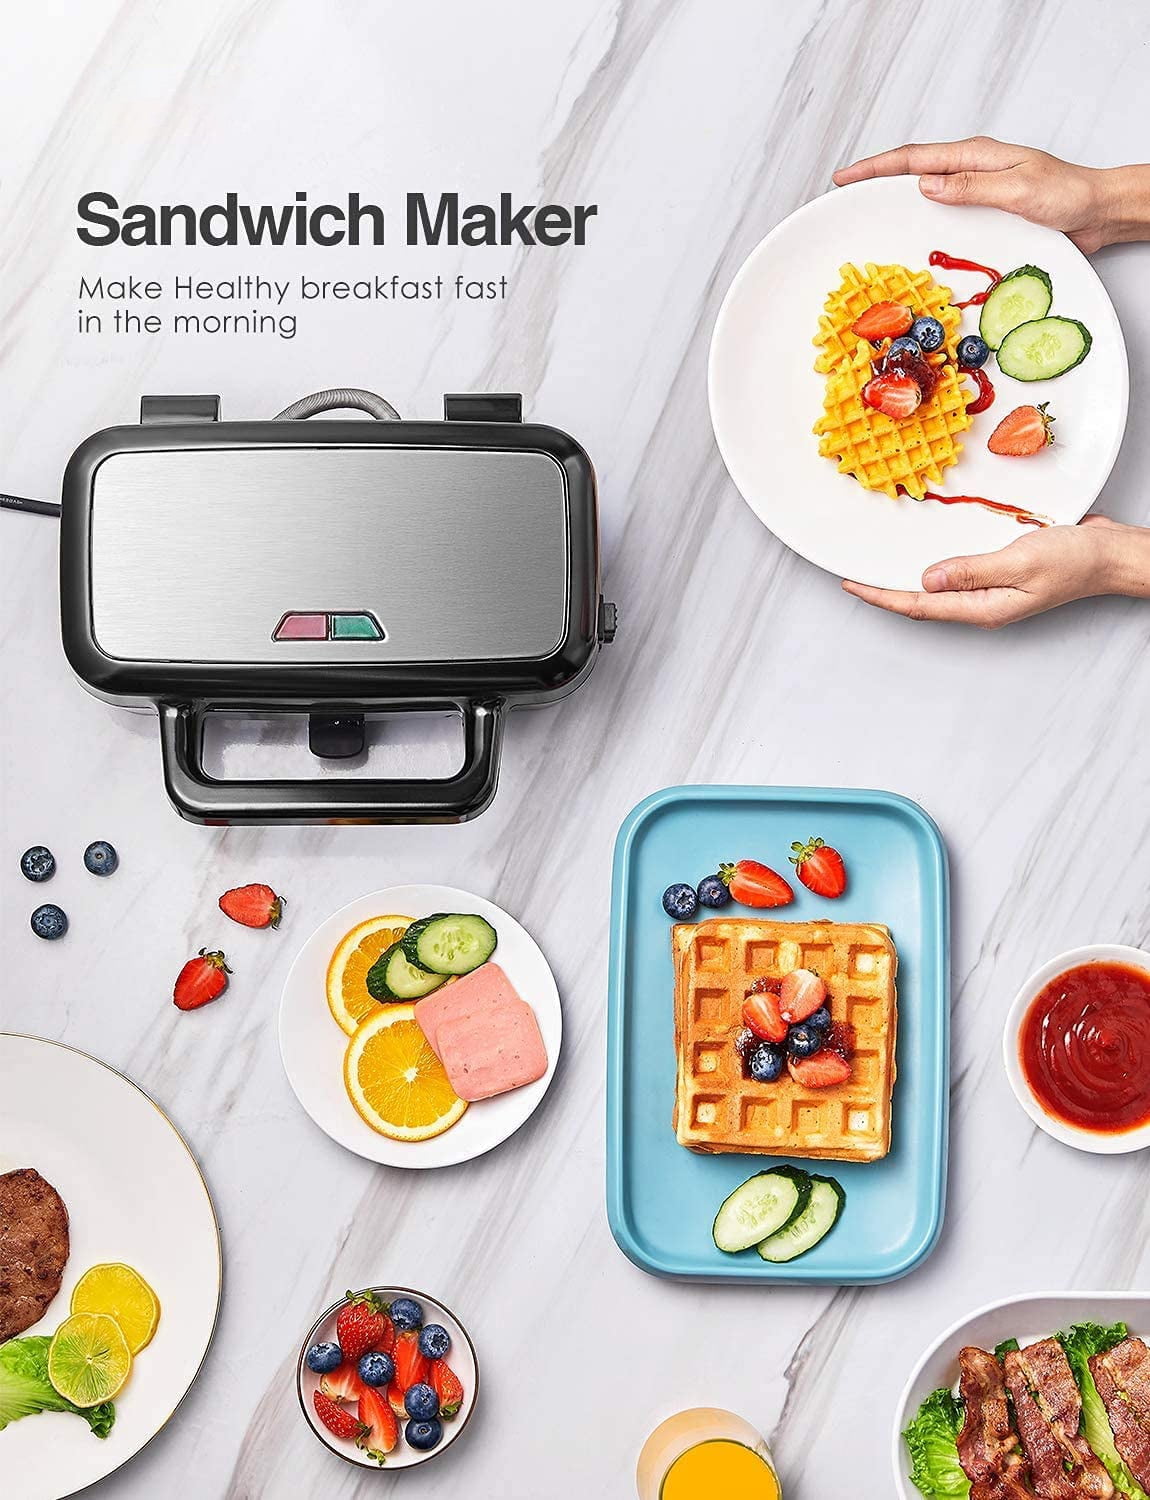 HOUSNAT 3 in 1 Sandwich Maker, Waffle Maker with Removable Plates, 120